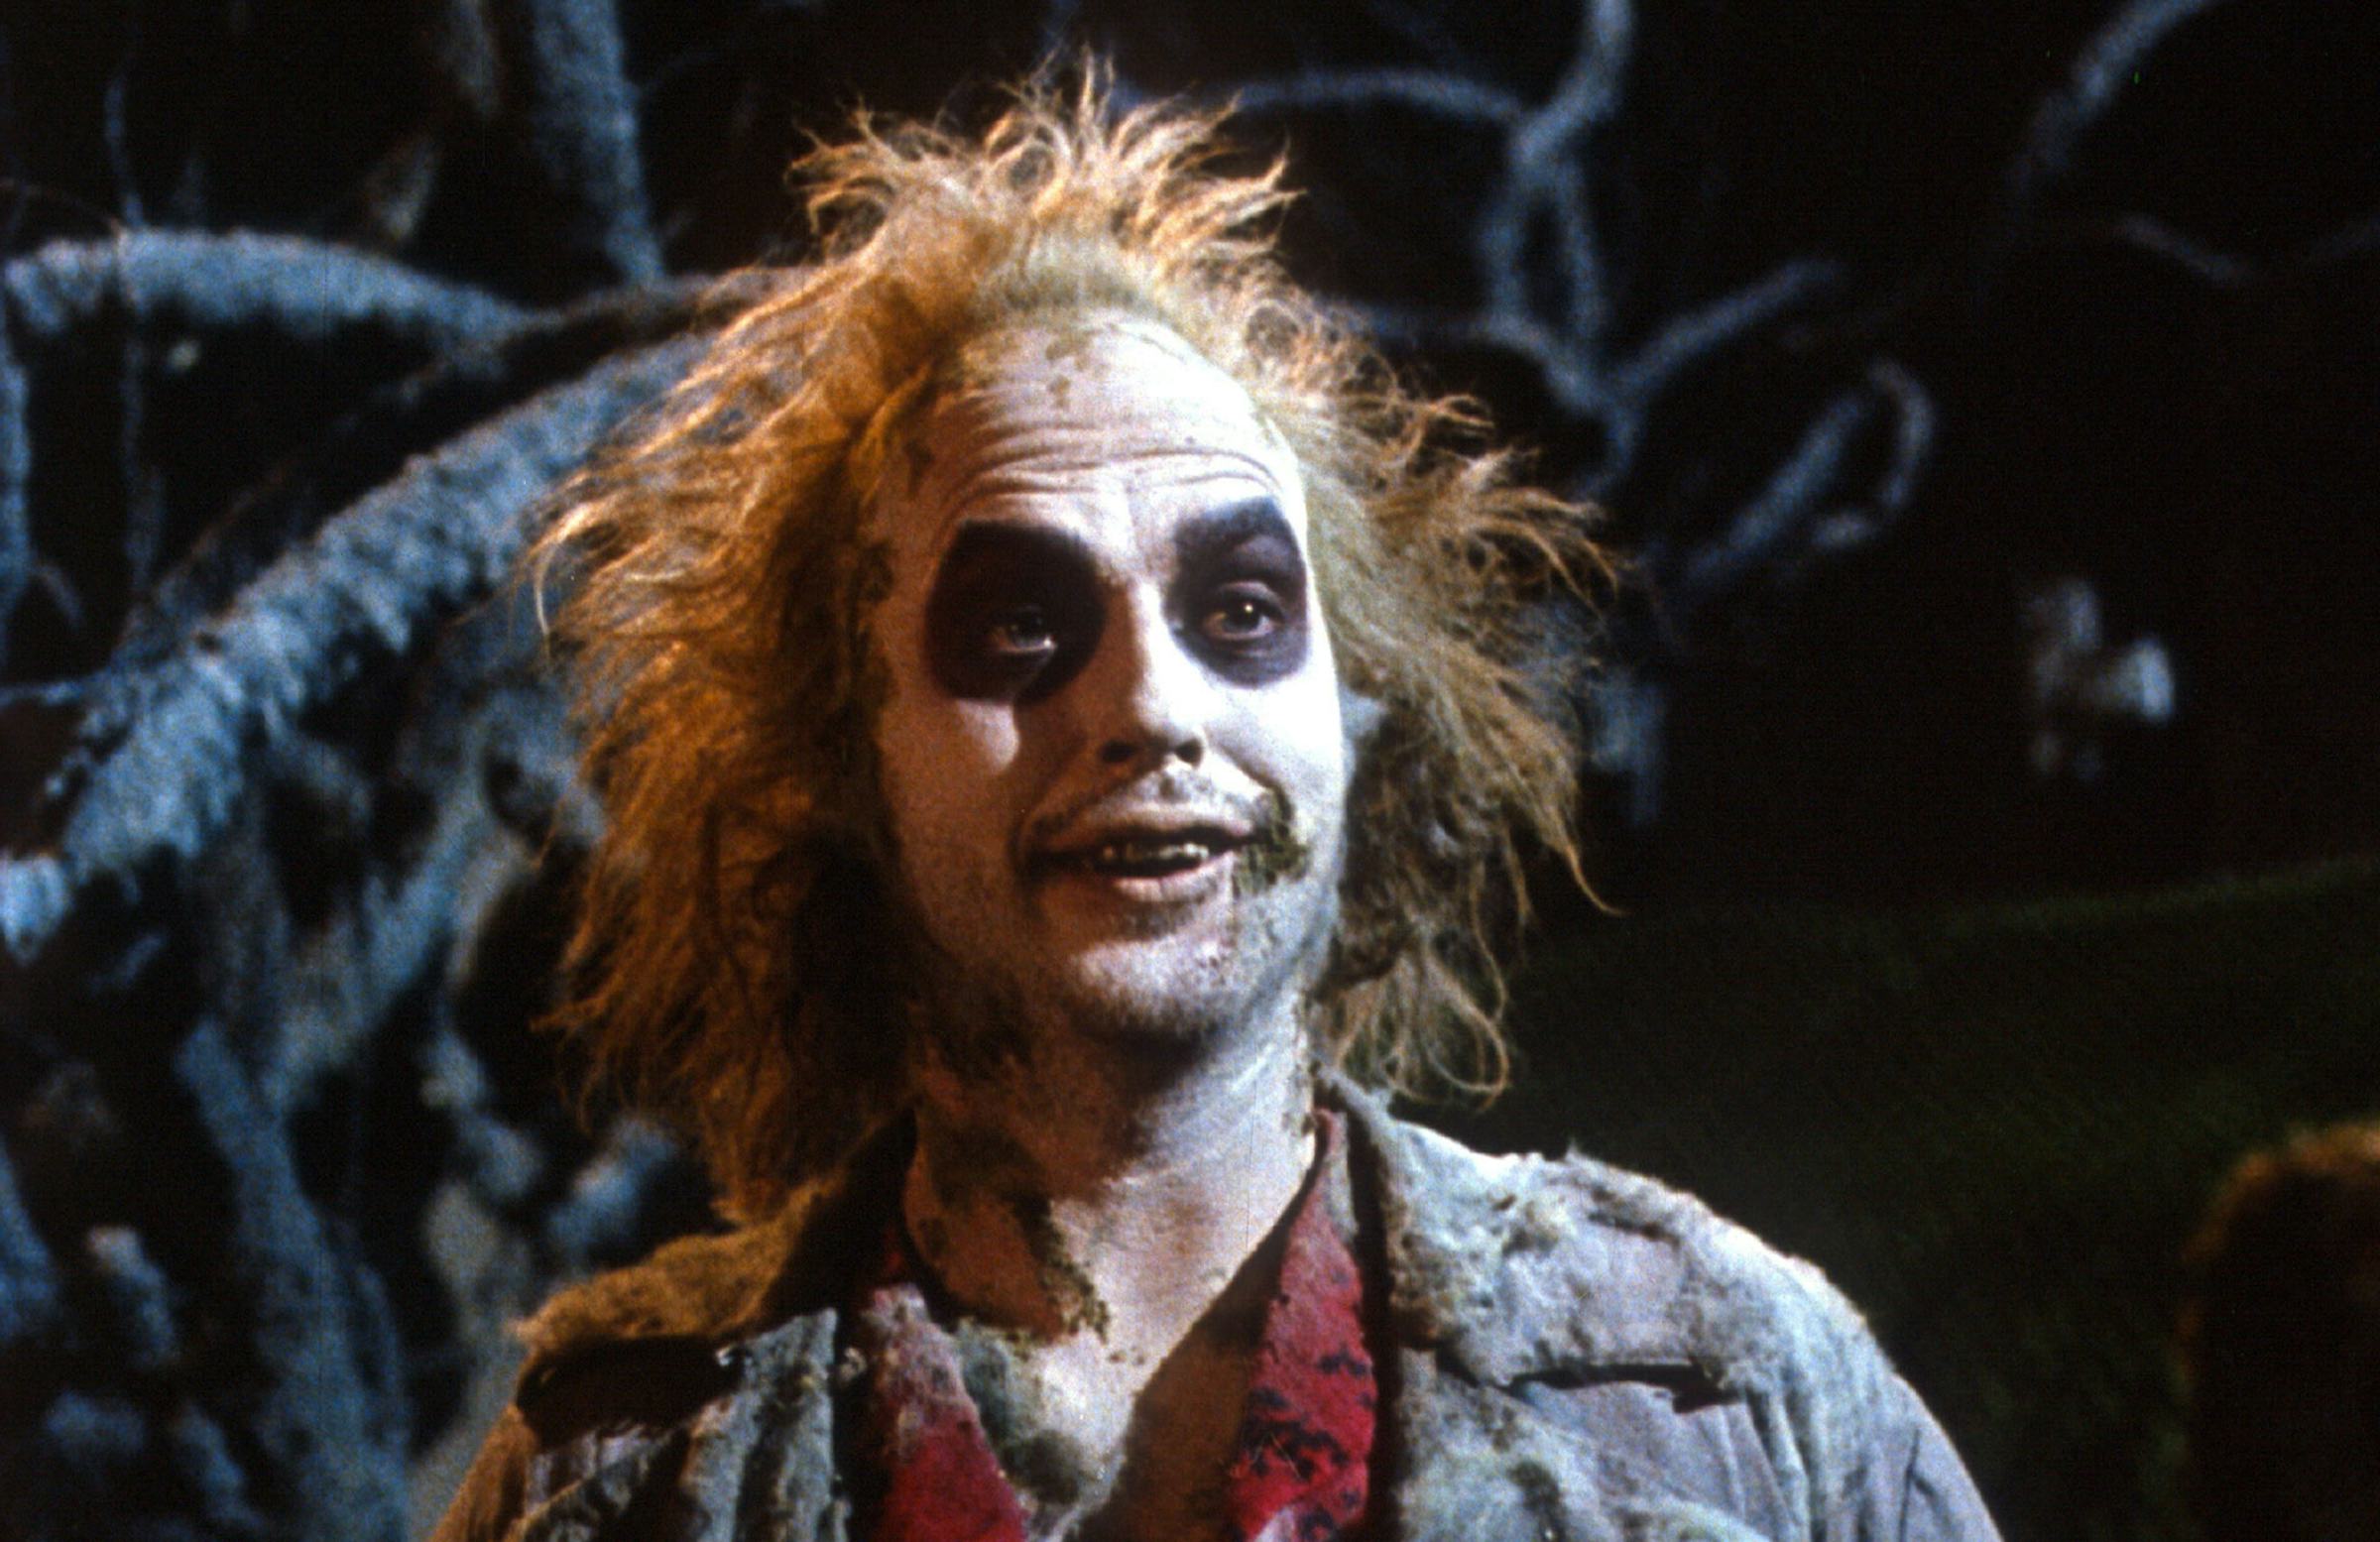 We’re Finally Getting The ‘Beetlejuice’ Musical We Deserve